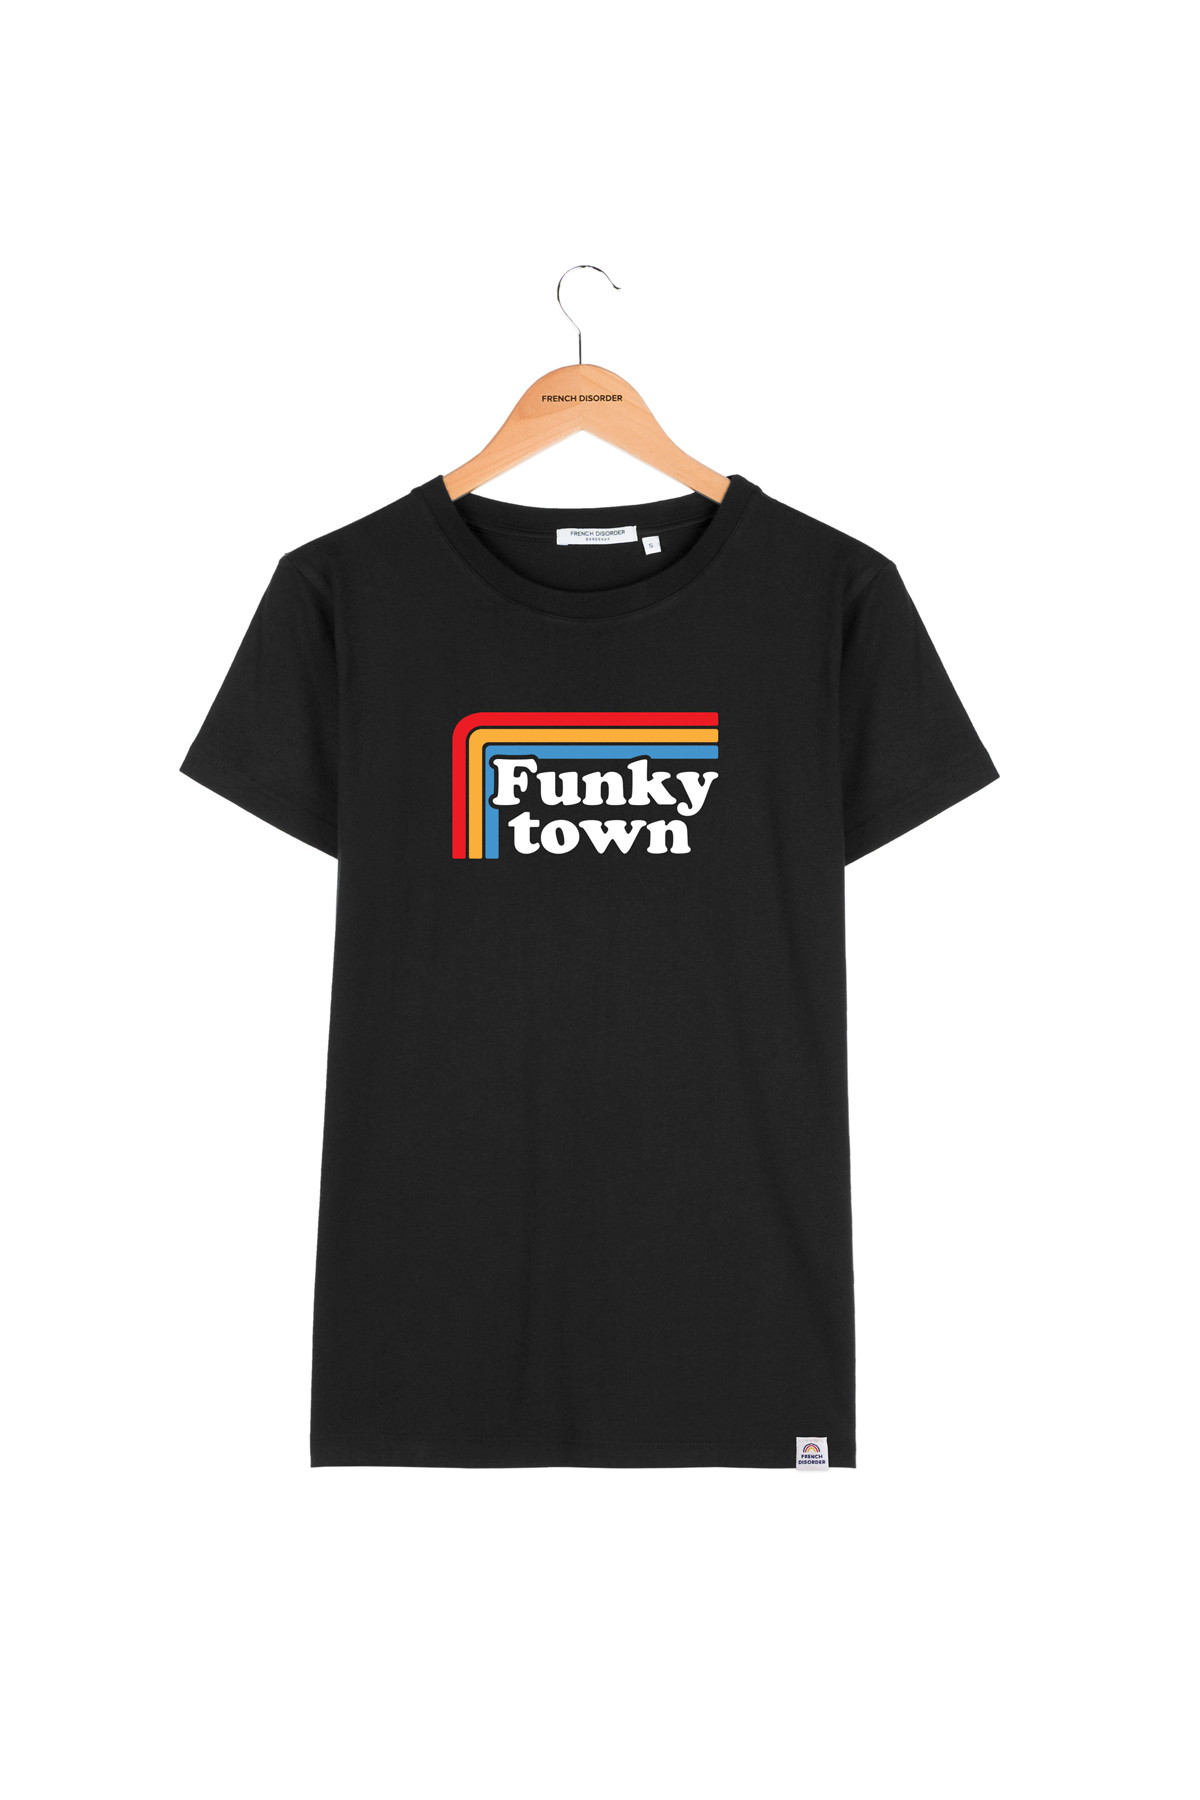 Photo de T-SHIRTS COL ROND Tshirt FUNKY TOWN chez French Disorder